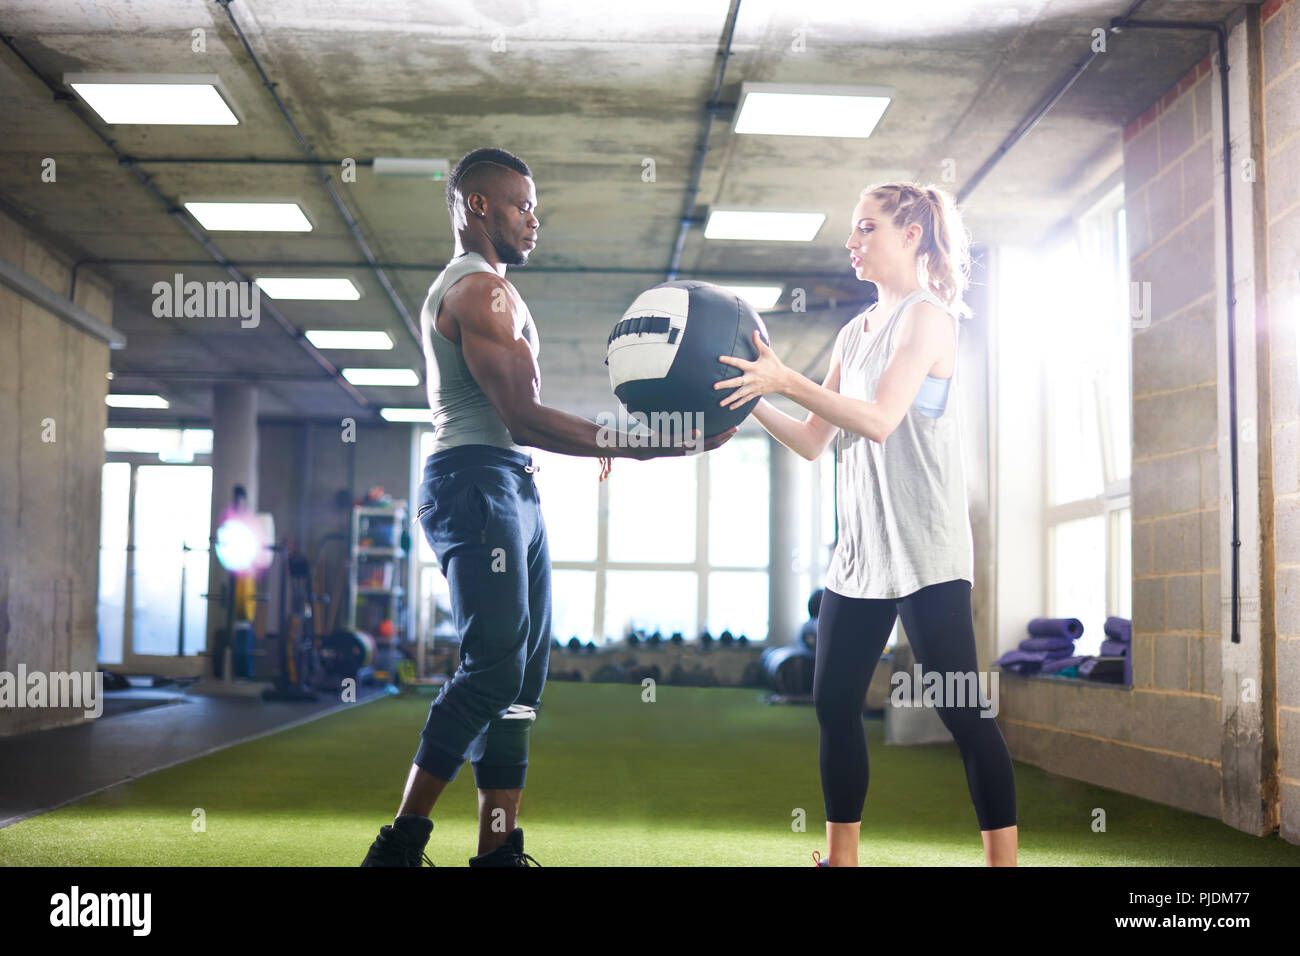 Trainer handing over medicine ball to female client in gym Stock Photo